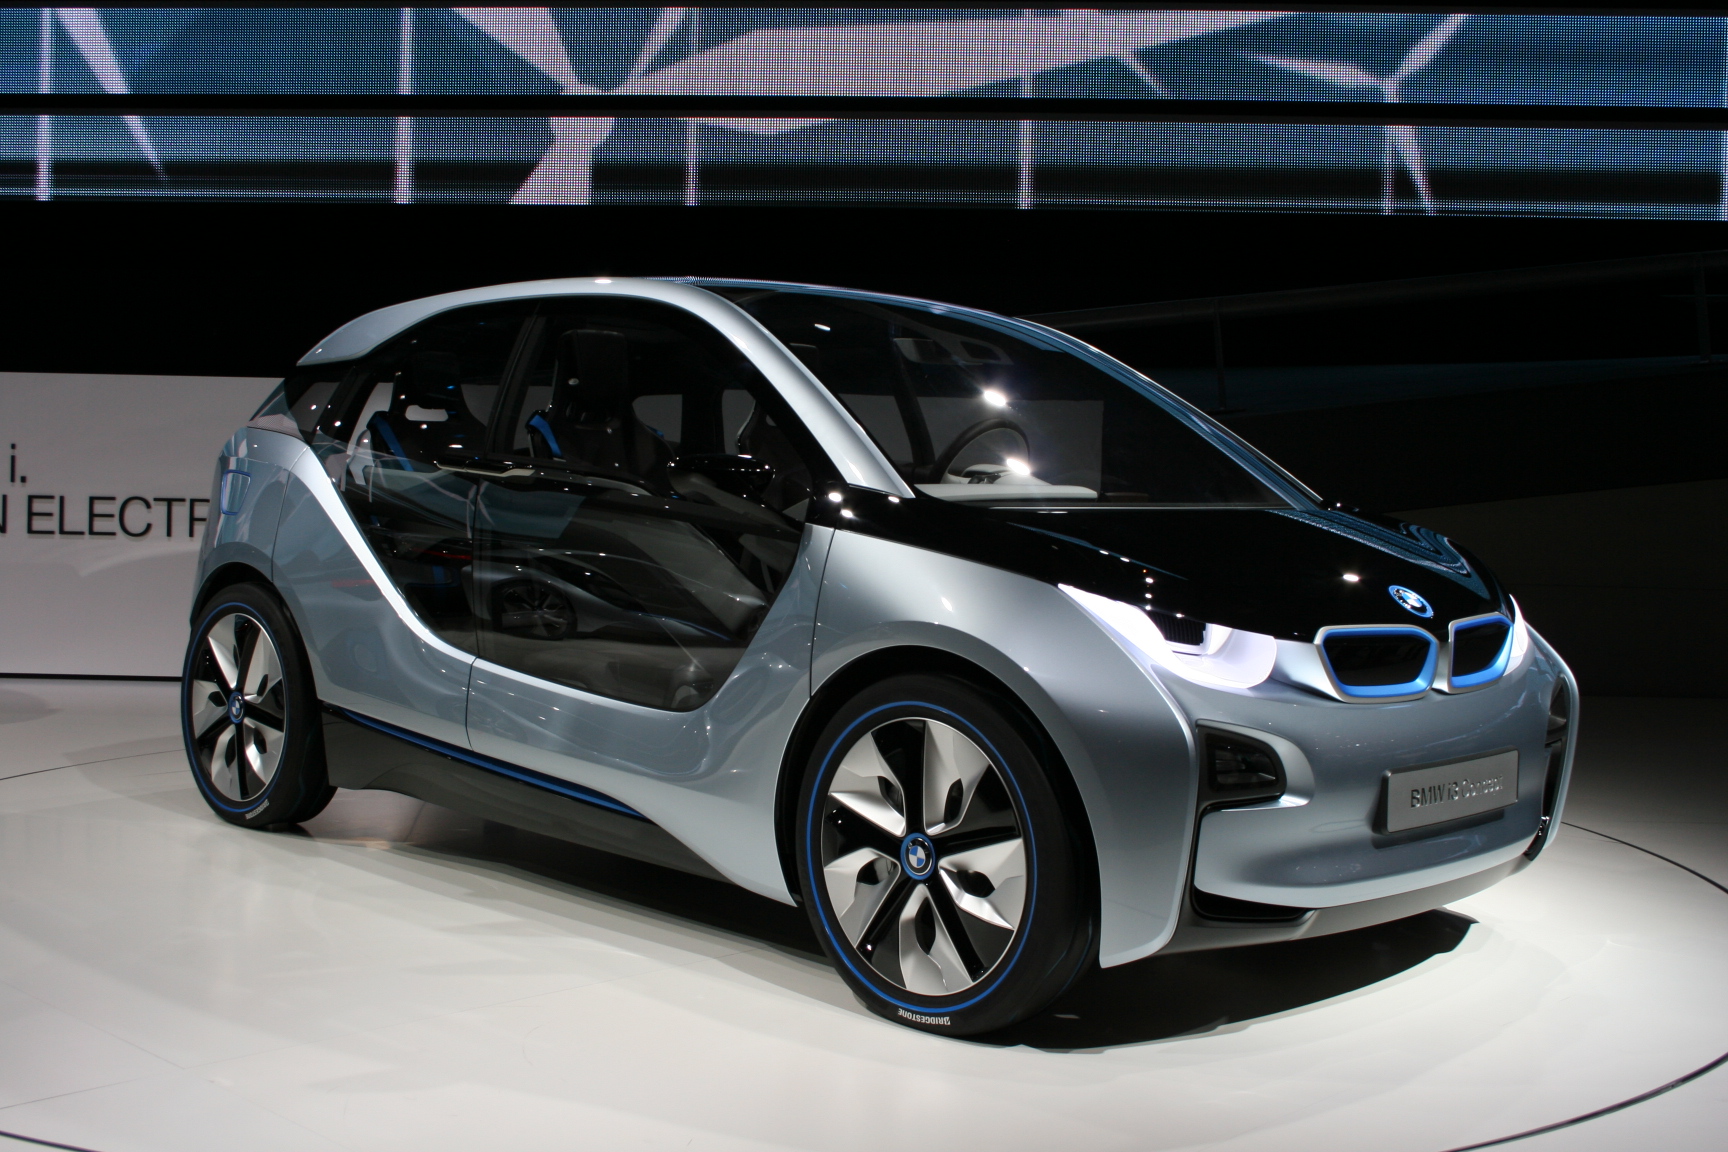 HQ BMW I3 Concept Wallpapers | File 911.09Kb